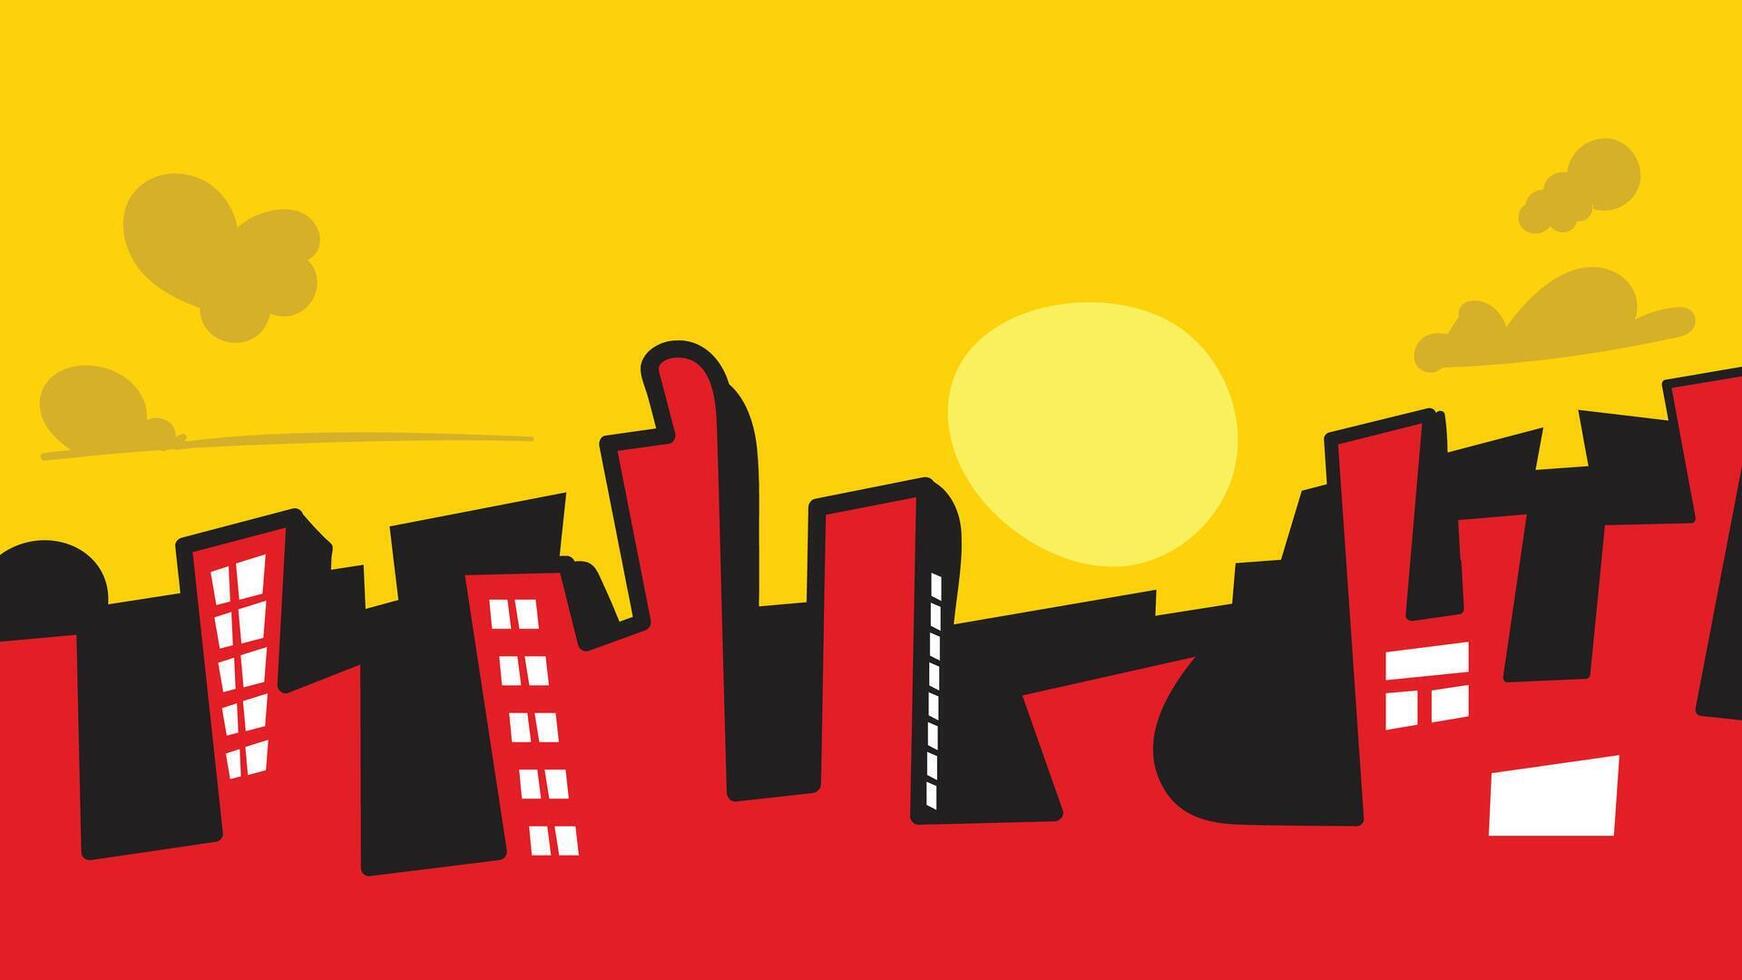 Silhouette of an urban cityscape with sun and clouds plus space for text vector